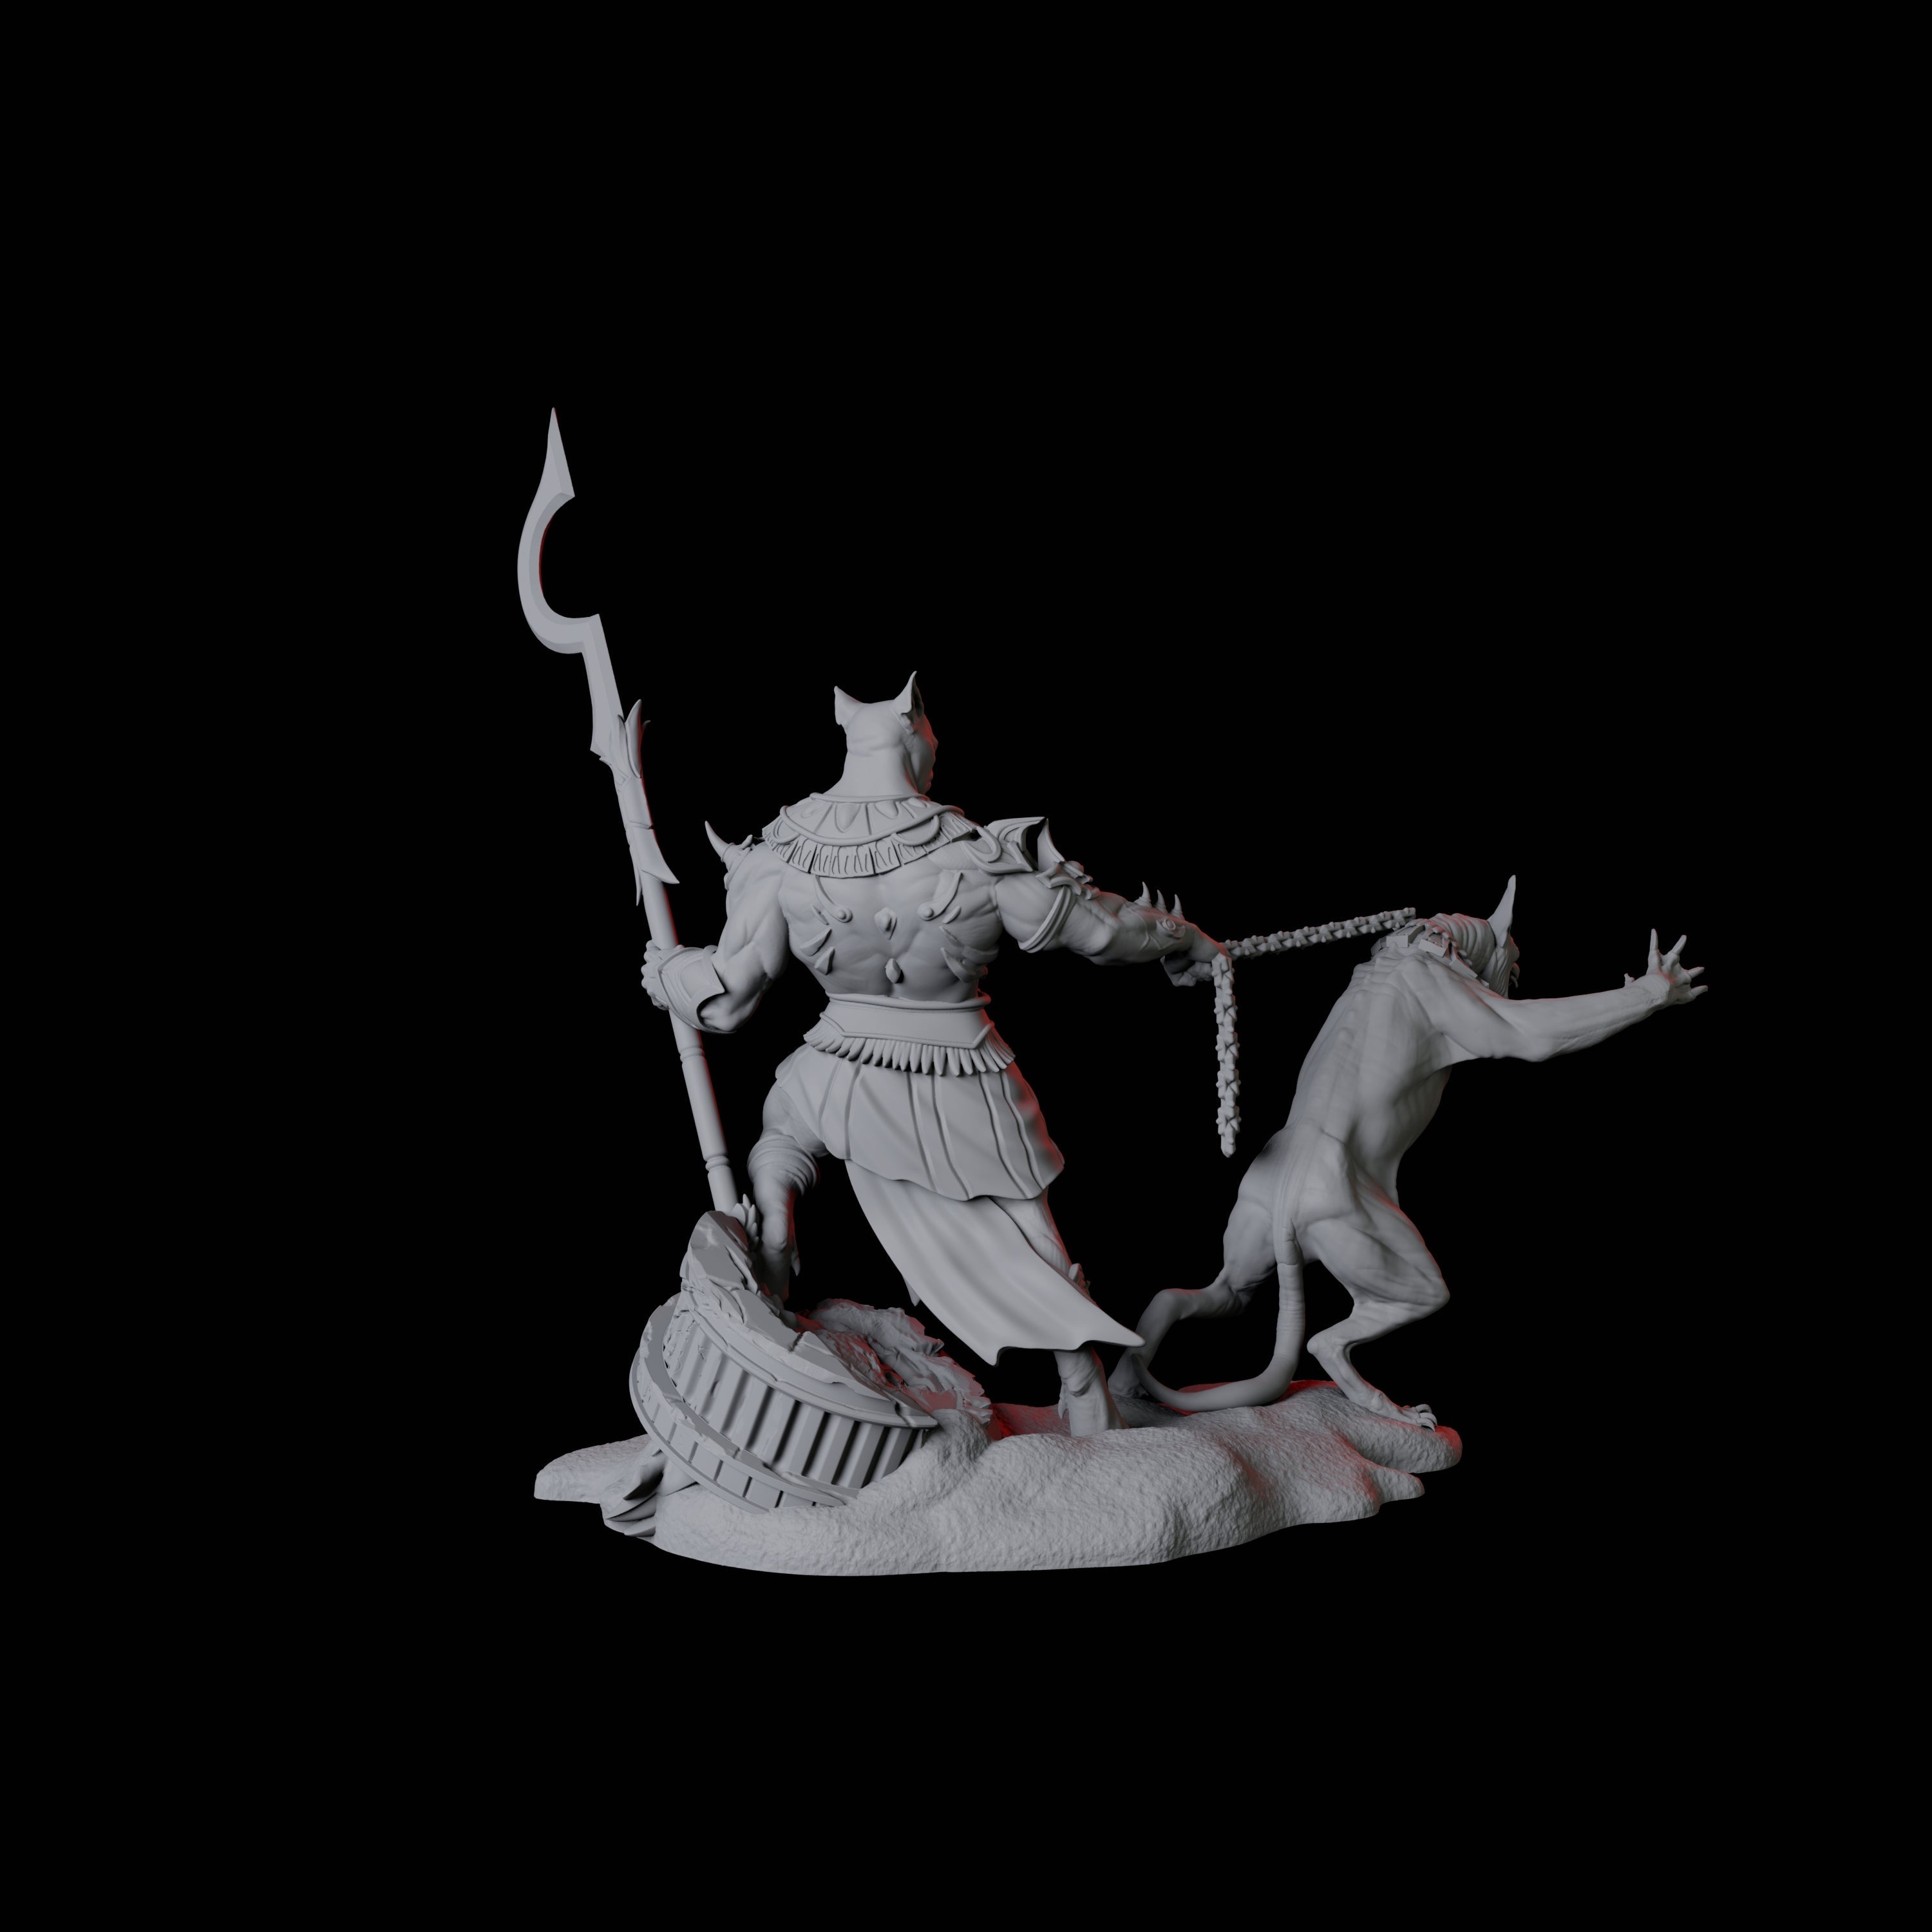 Powerful Tabaxi Warrior A Miniature for Dungeons and Dragons, Pathfinder or other TTRPGs